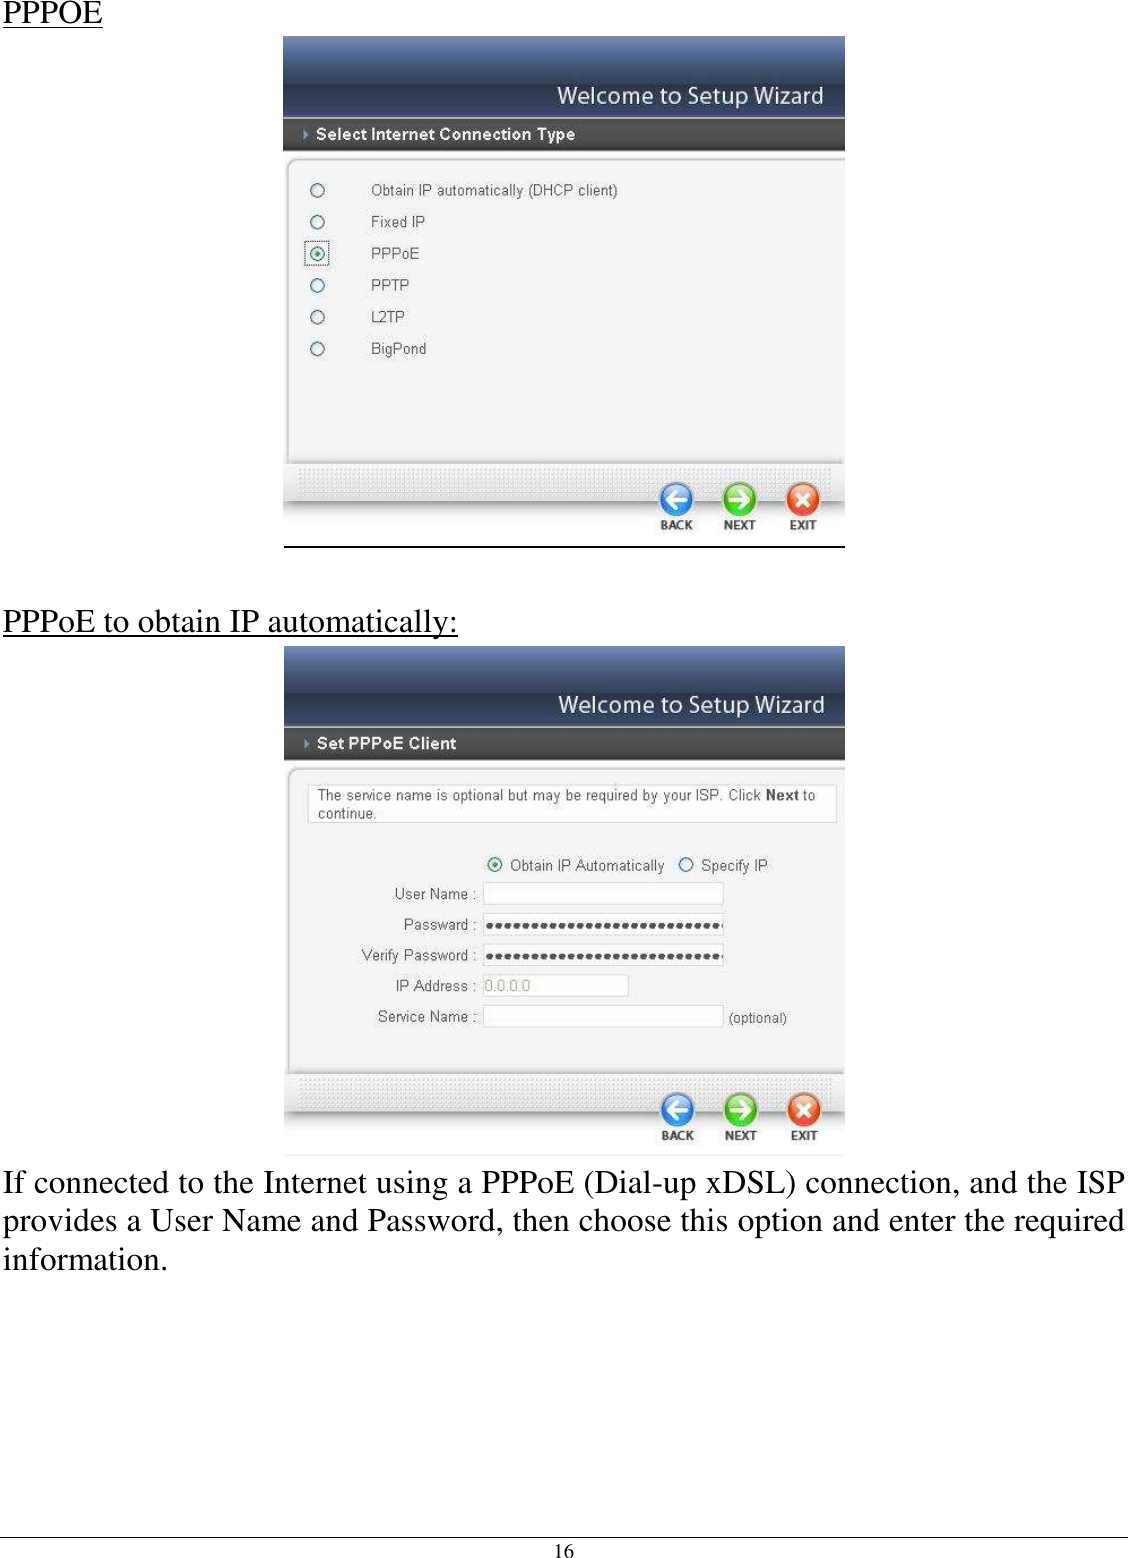 16 PPPOE   PPPoE to obtain IP automatically:  If connected to the Internet using a PPPoE (Dial-up xDSL) connection, and the ISP provides a User Name and Password, then choose this option and enter the required information.  